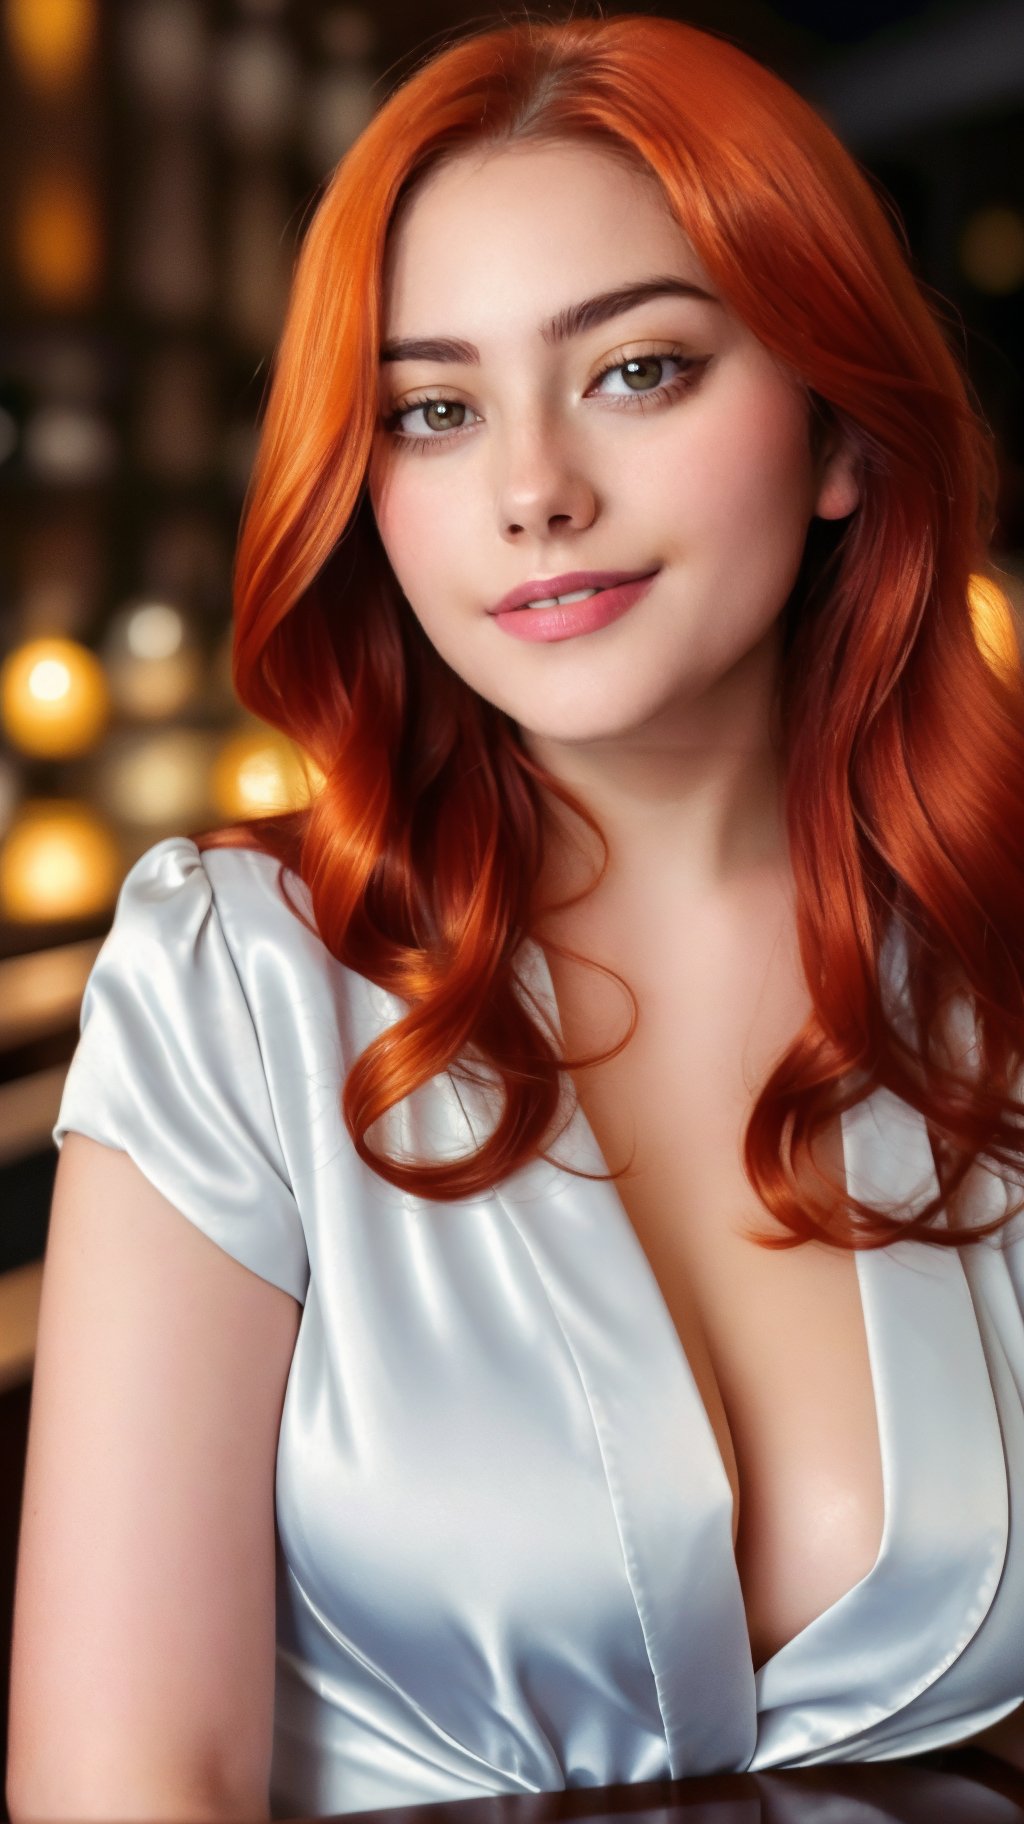 Close-up shot of a stunning 23-year-old turkey woman, dressed in a elegant blouse, sips on a drink at a dimly lit bar. Her bright ginger hair cascades down her porcelain skin as she flashes a radiant smile, showcasing her perfectly aligned features and captivating gaze. The cinematic lighting casts a warm glow on her very beautiful lady-like face, captured with raw, unfiltered intimacy.